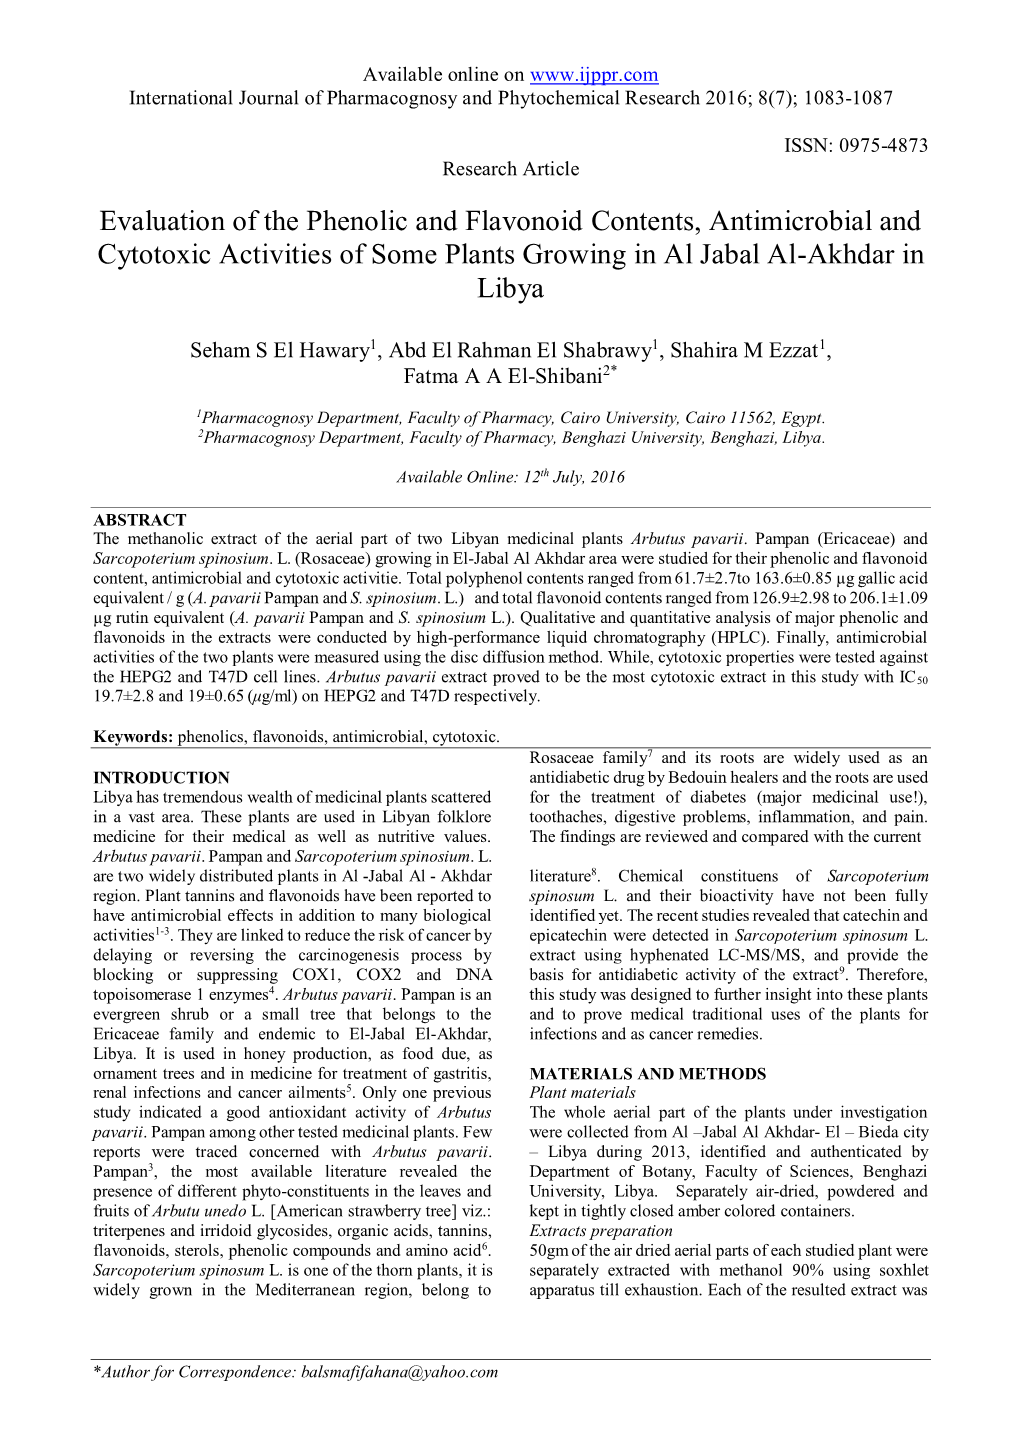 Evaluation of the Phenolic and Flavonoid Contents, Antimicrobial and Cytotoxic Activities of Some Plants Growing in Al Jabal Al-Akhdar in Libya